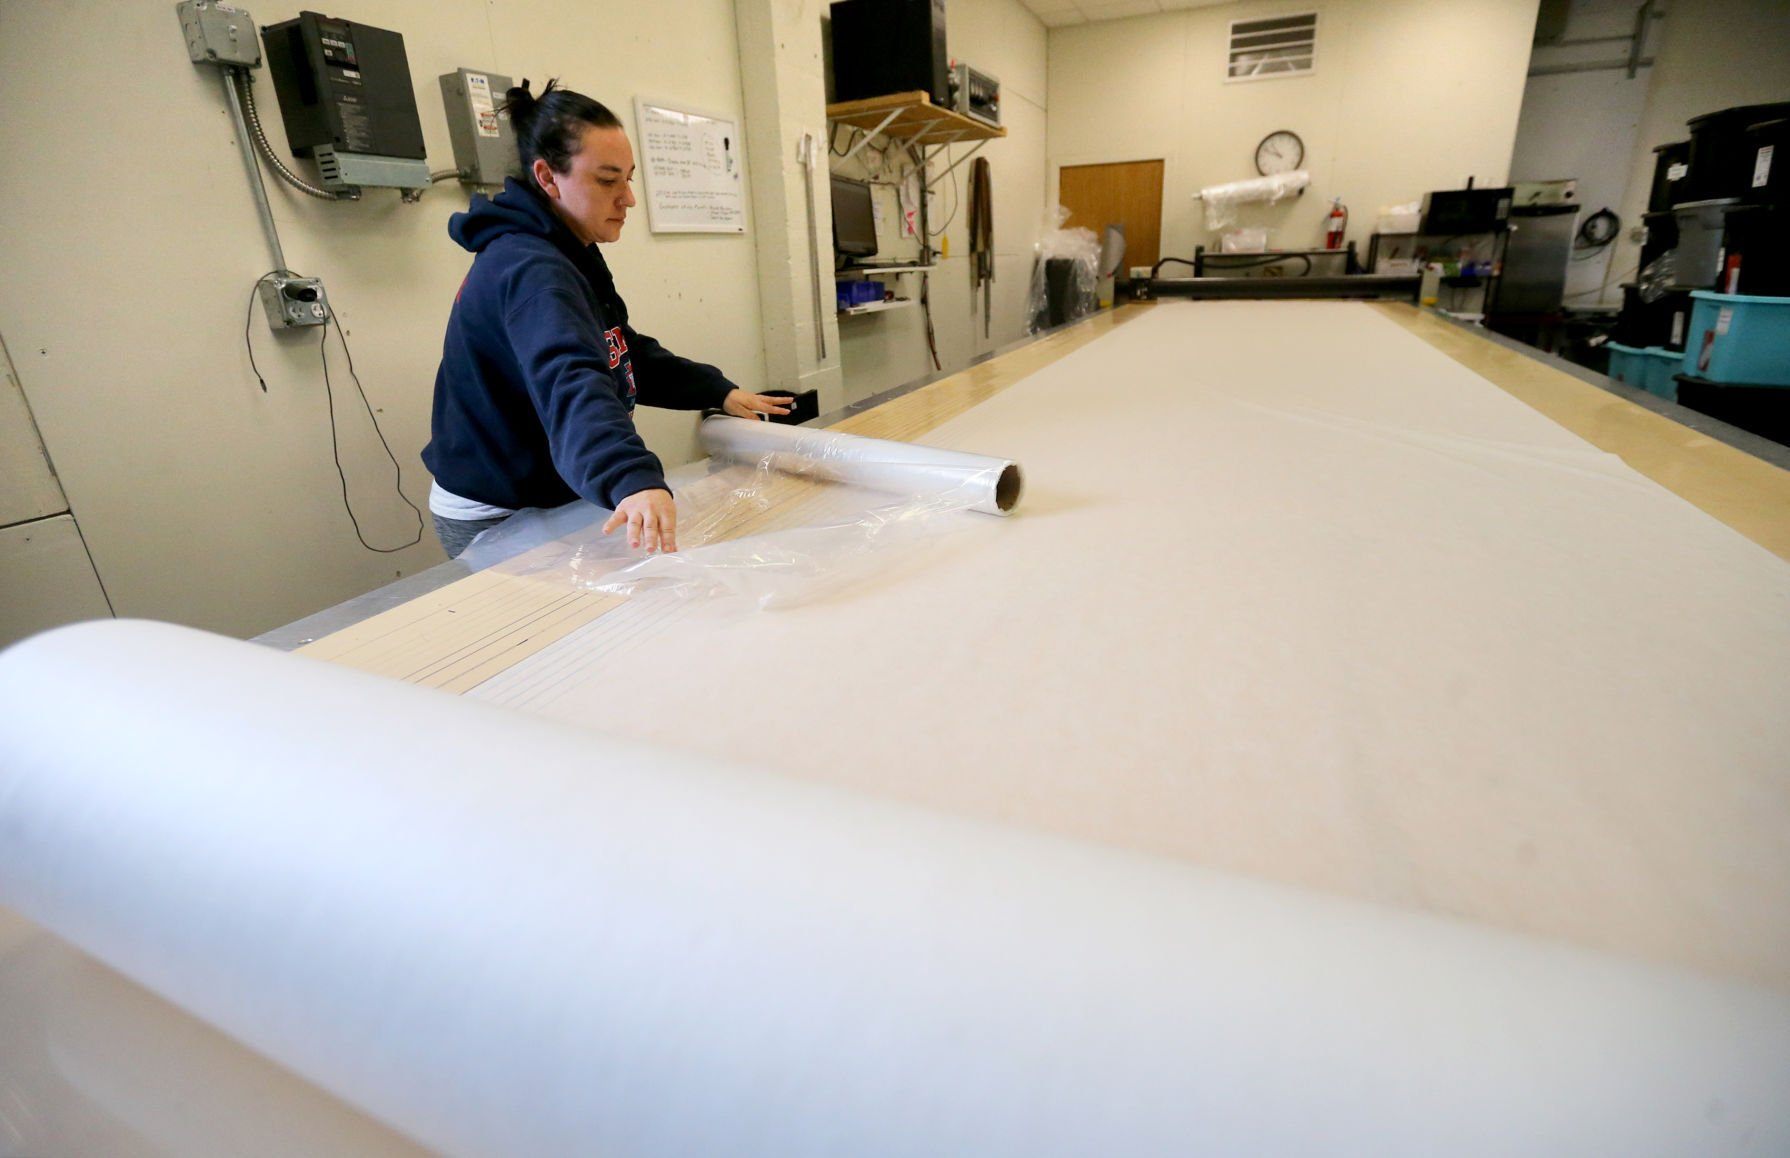 Amber Herber rolls out material to cut at Bauer RV Upholstery in Dickeyville, Wis., on Monday, April 11, 2022.    PHOTO CREDIT: JESSICA REILLY